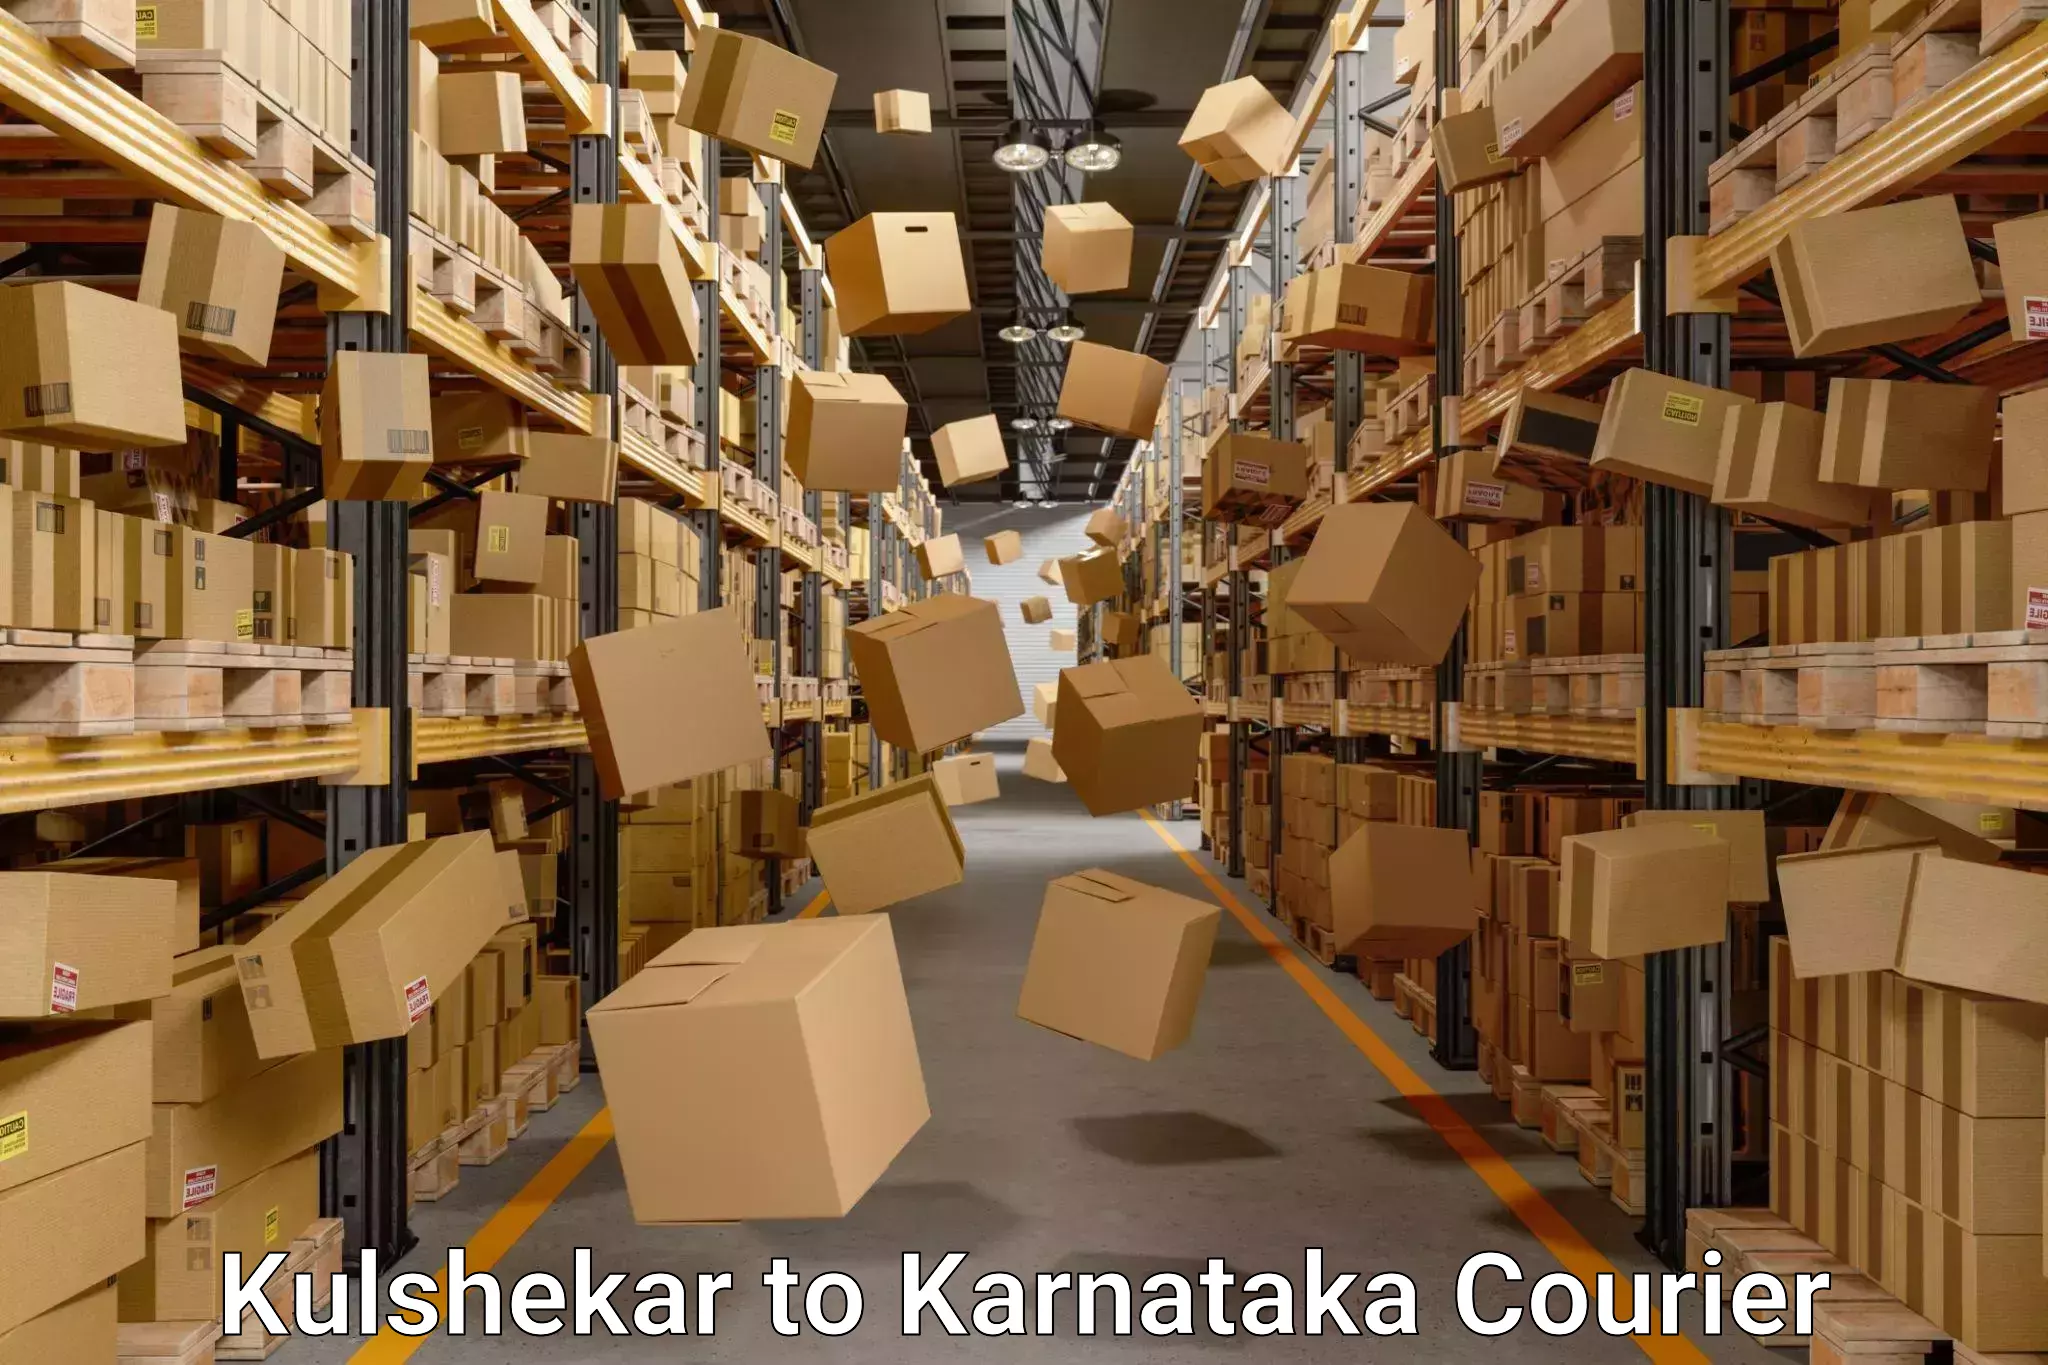 Quality relocation services Kulshekar to Dharwad